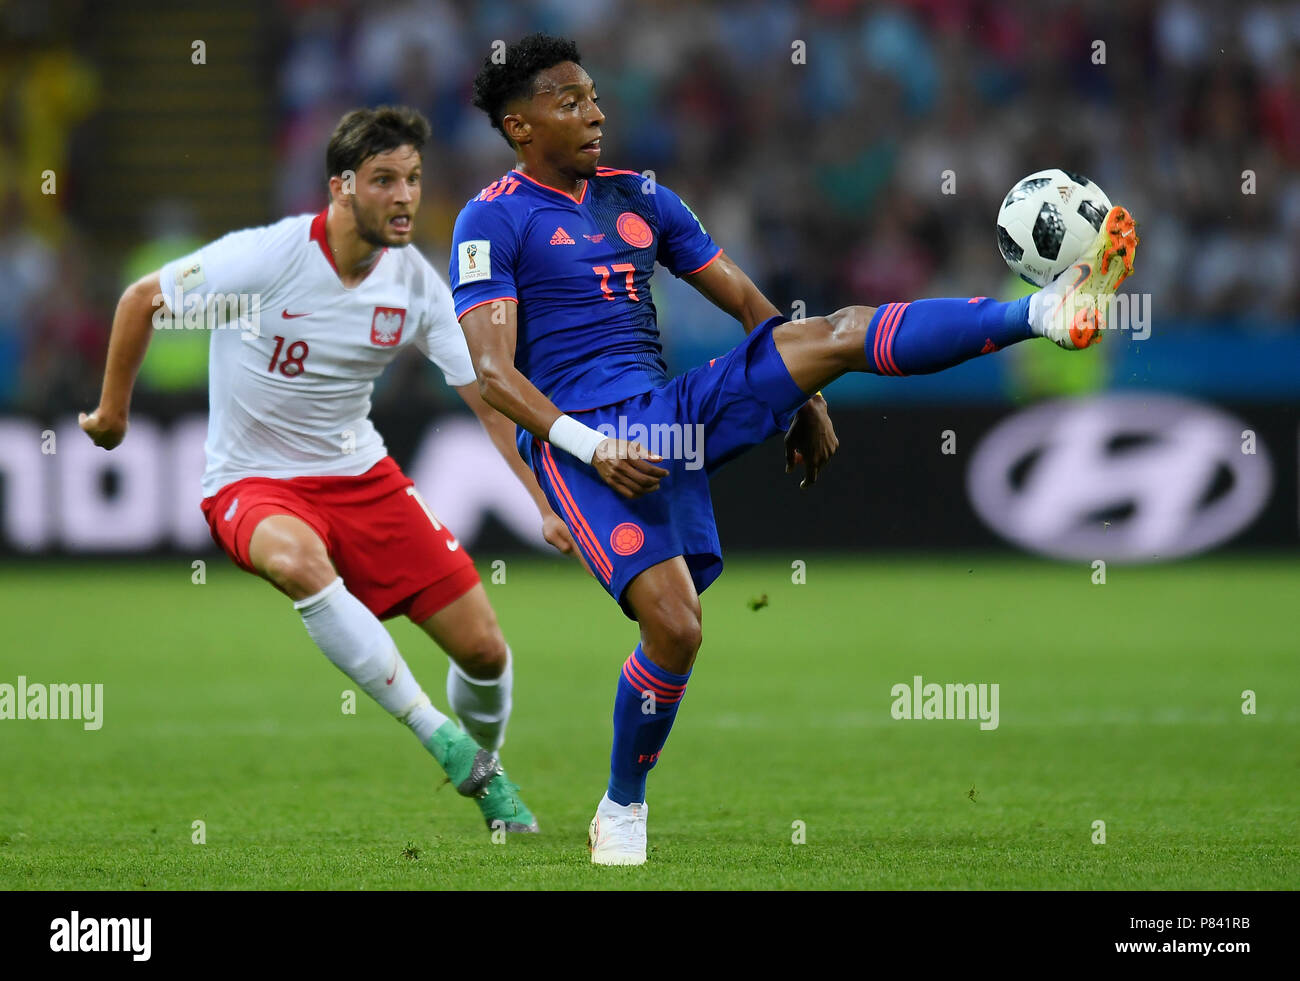 KAZAN, RUSSIA - JUNE 24: Johan Mojica of Colombia controls the ball during the 2018 FIFA World Cup Russia group H match between Poland and Colombia at Kazan Arena on June 24, 2018 in Kazan, Russia. (Photo by Lukasz Laskowski/PressFocus/MB Media) Stock Photo